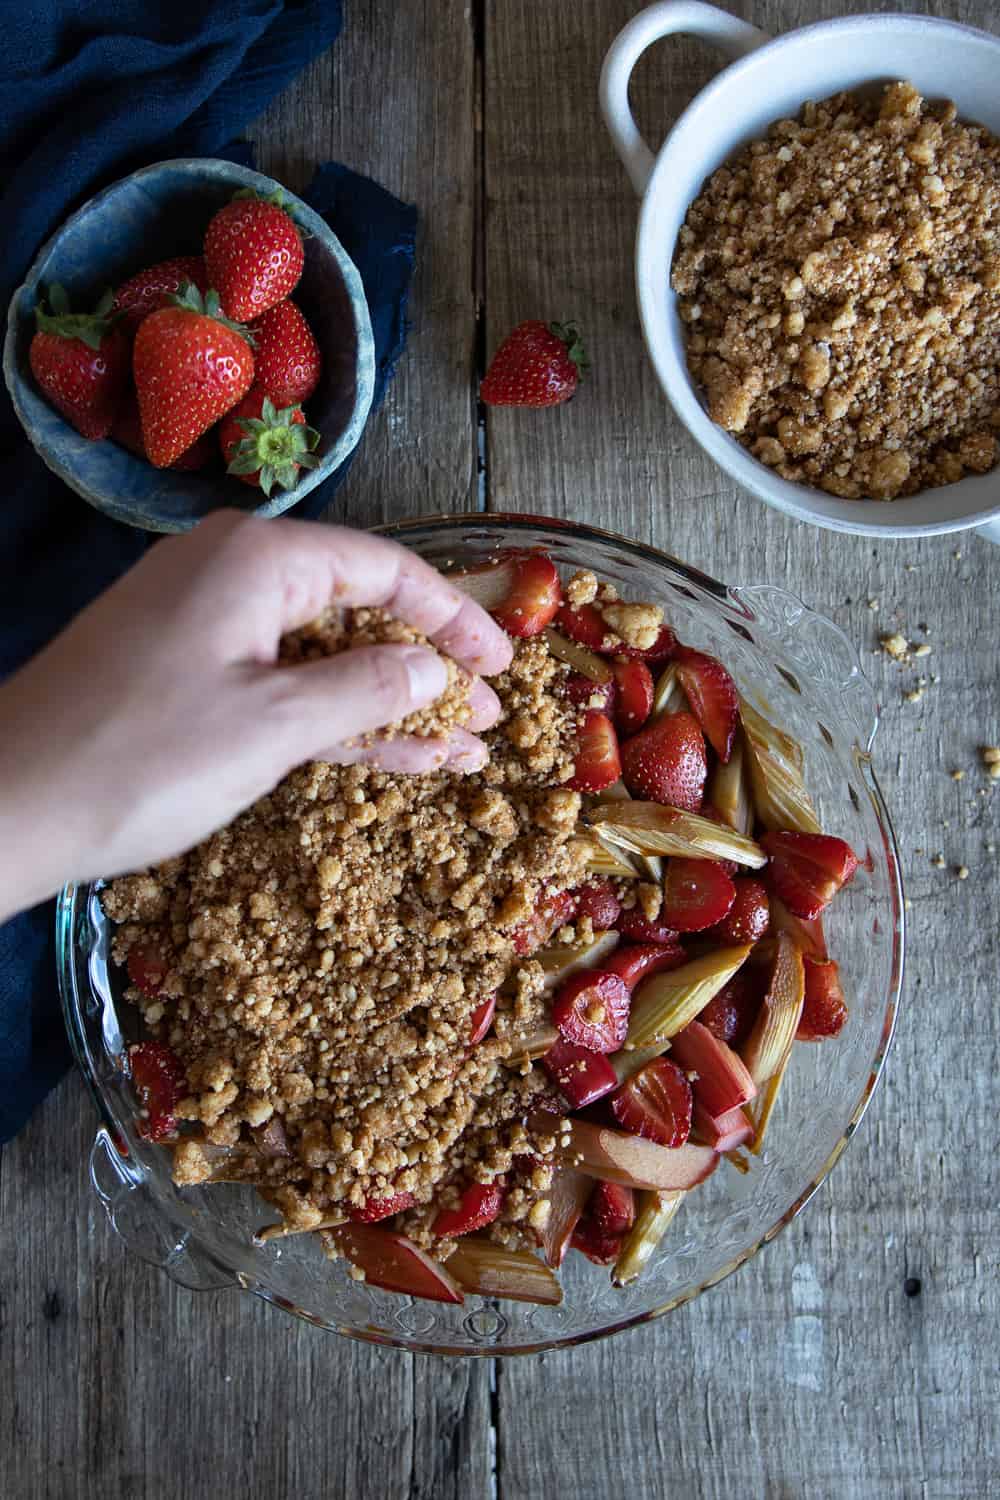 Adding the crumble on top of strawberries and rhubarb.